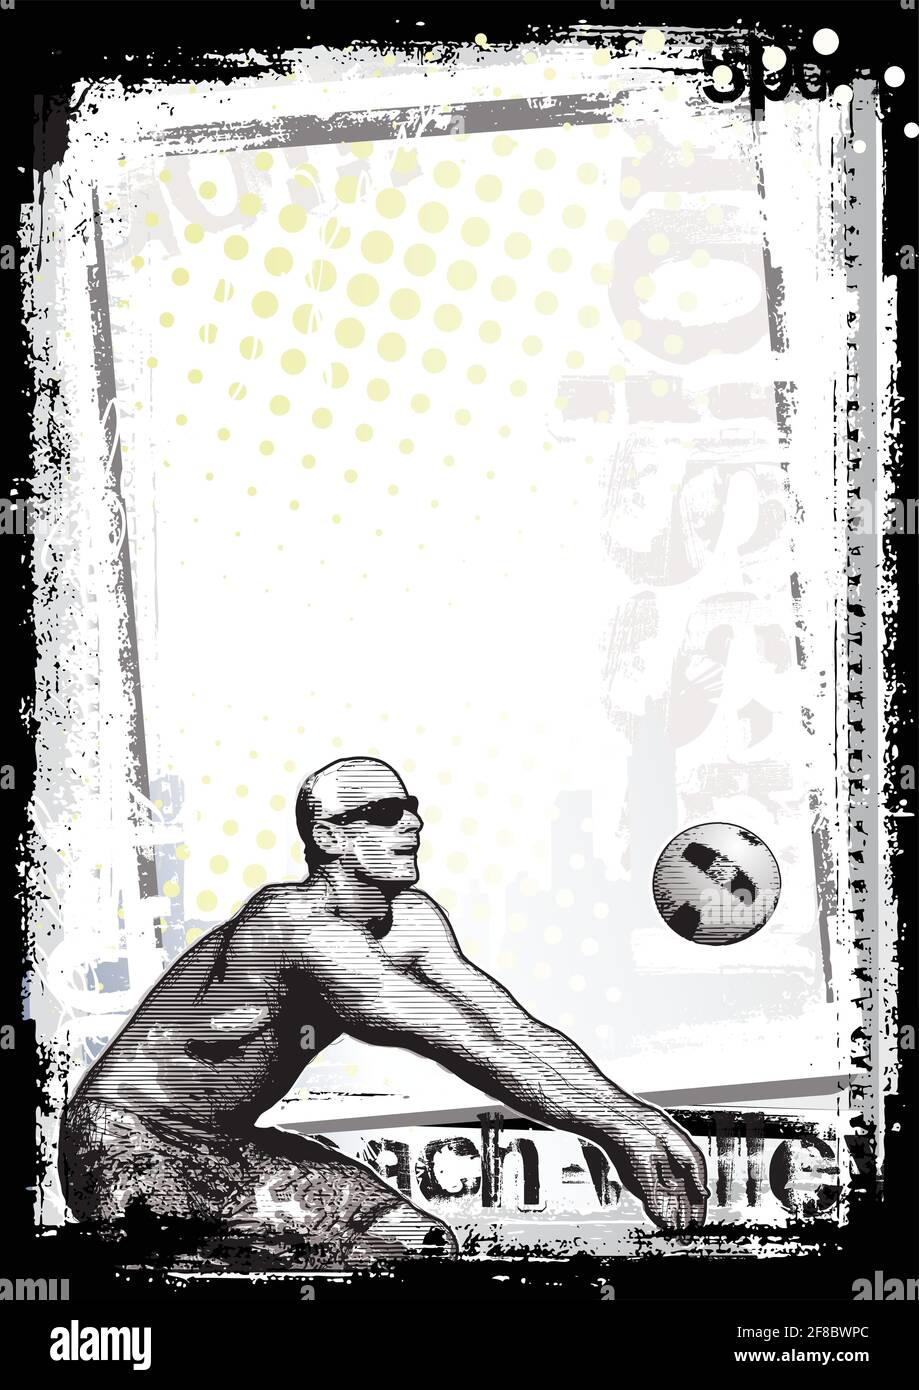 volleyball poster background Stock Vector Image & Art - Alamy